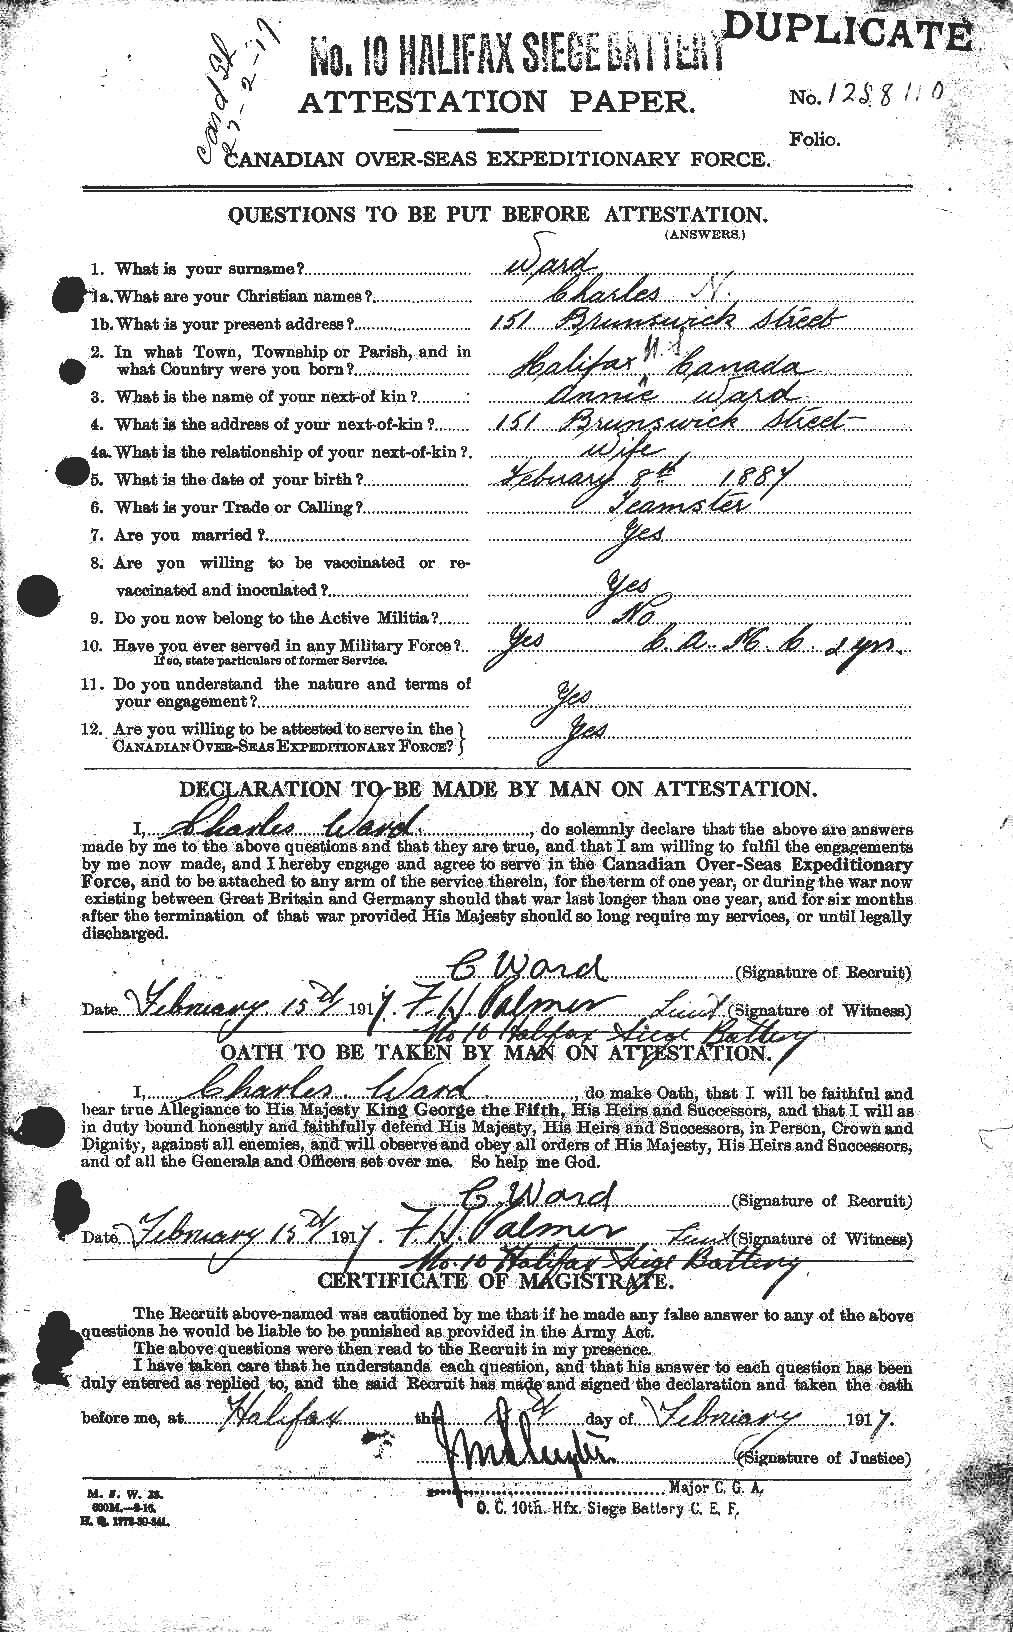 Personnel Records of the First World War - CEF 657569a